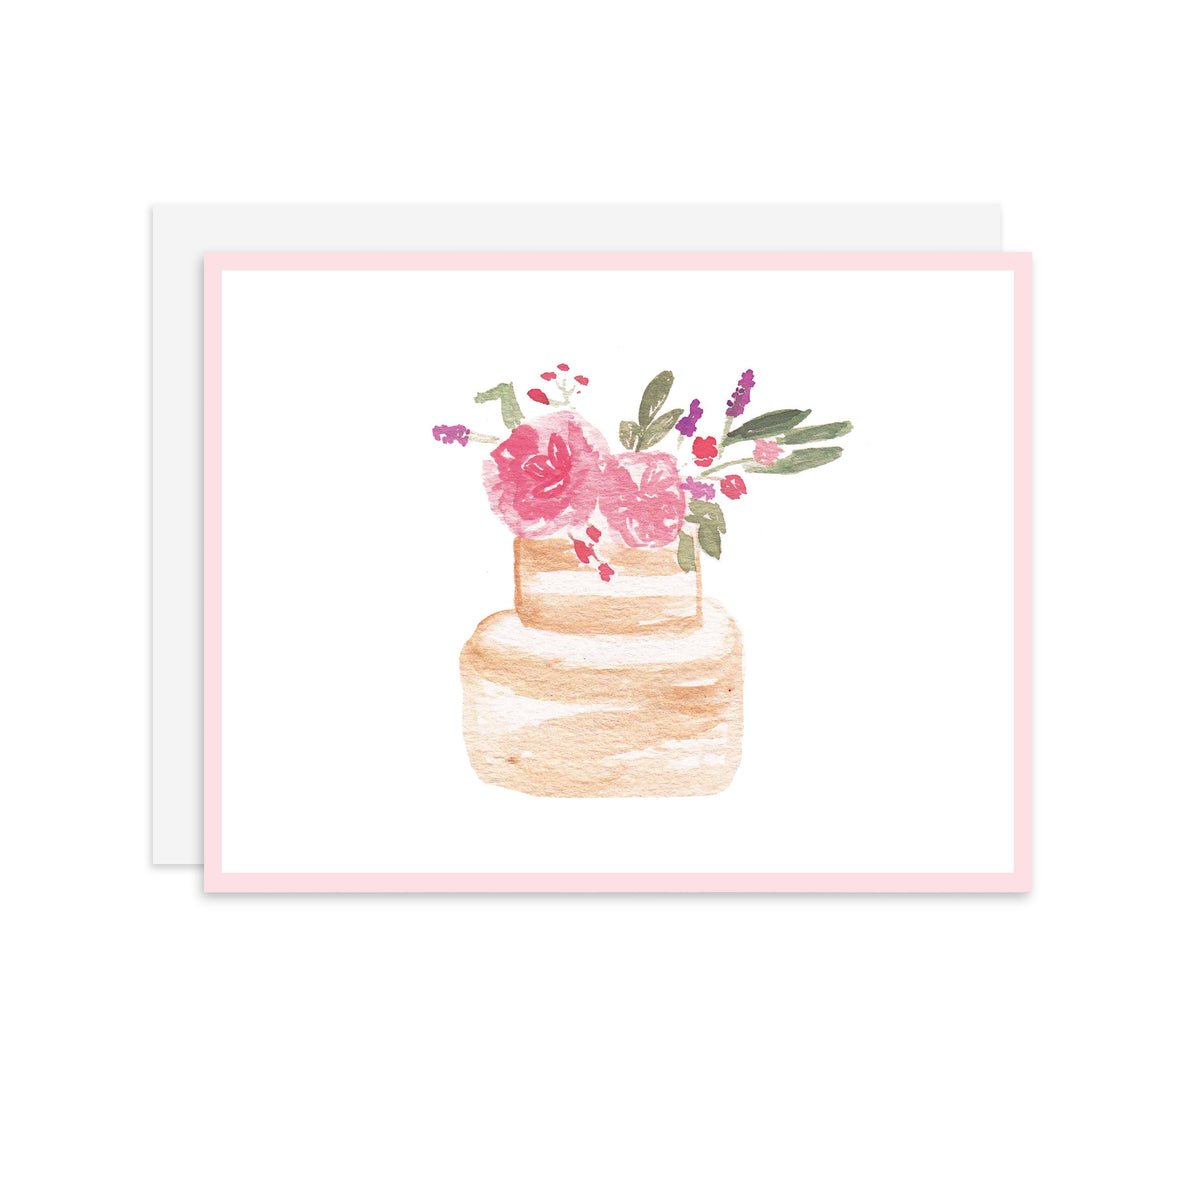 Floral Cake - A2 notecard